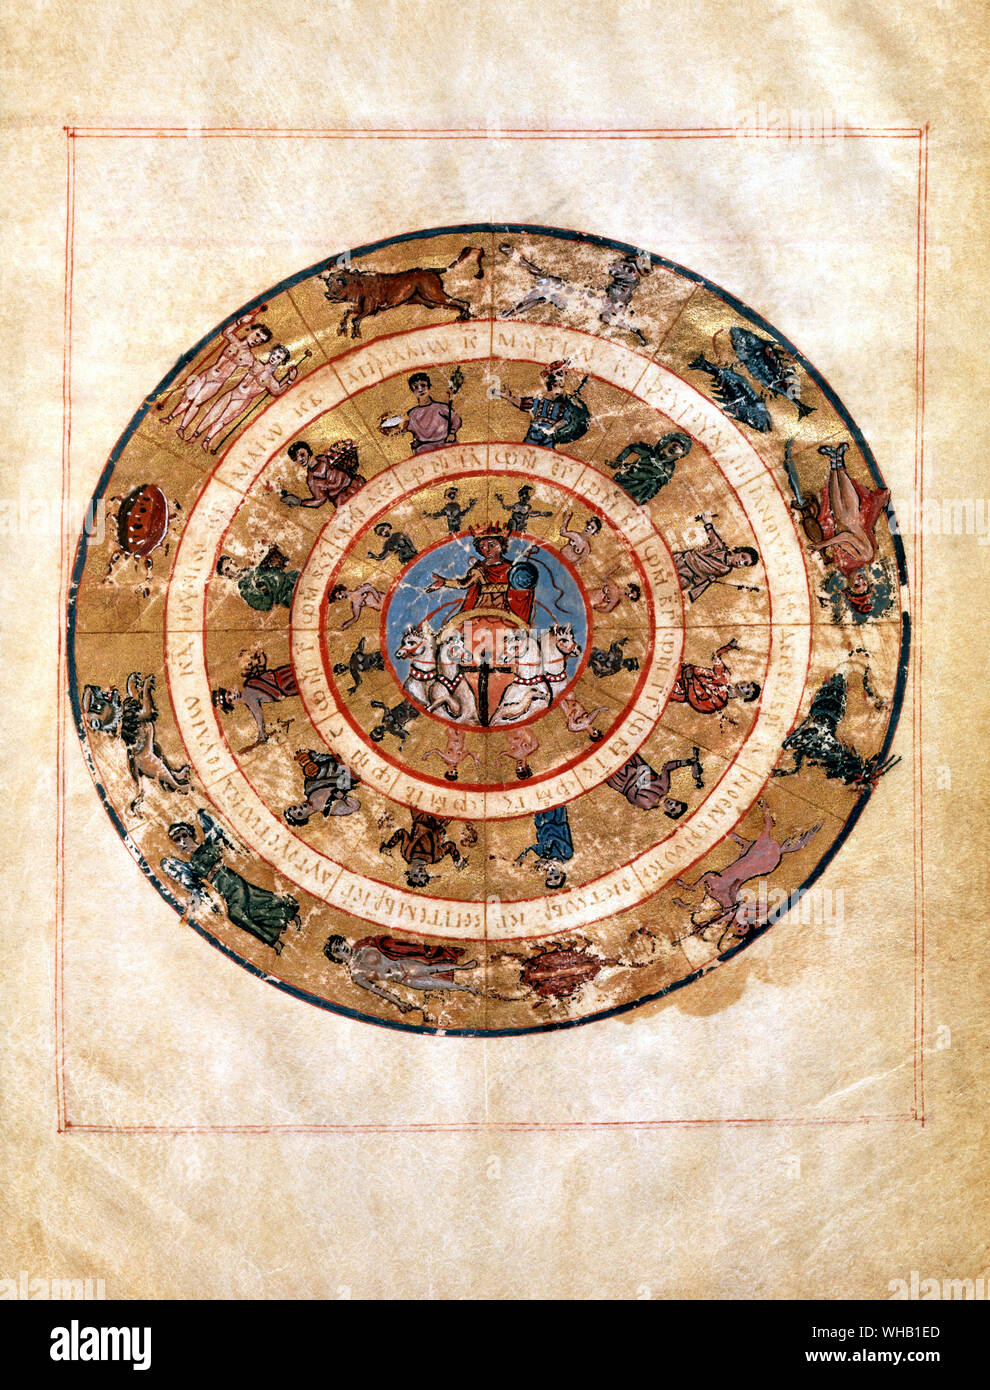 Astrology by Katina - The sun is his chariot and the signs of the zodiac are shown on this Byzantine illustration (AD820) to Ptolemy's treatise on astrology, the Tetrabiblos.. Stock Photo